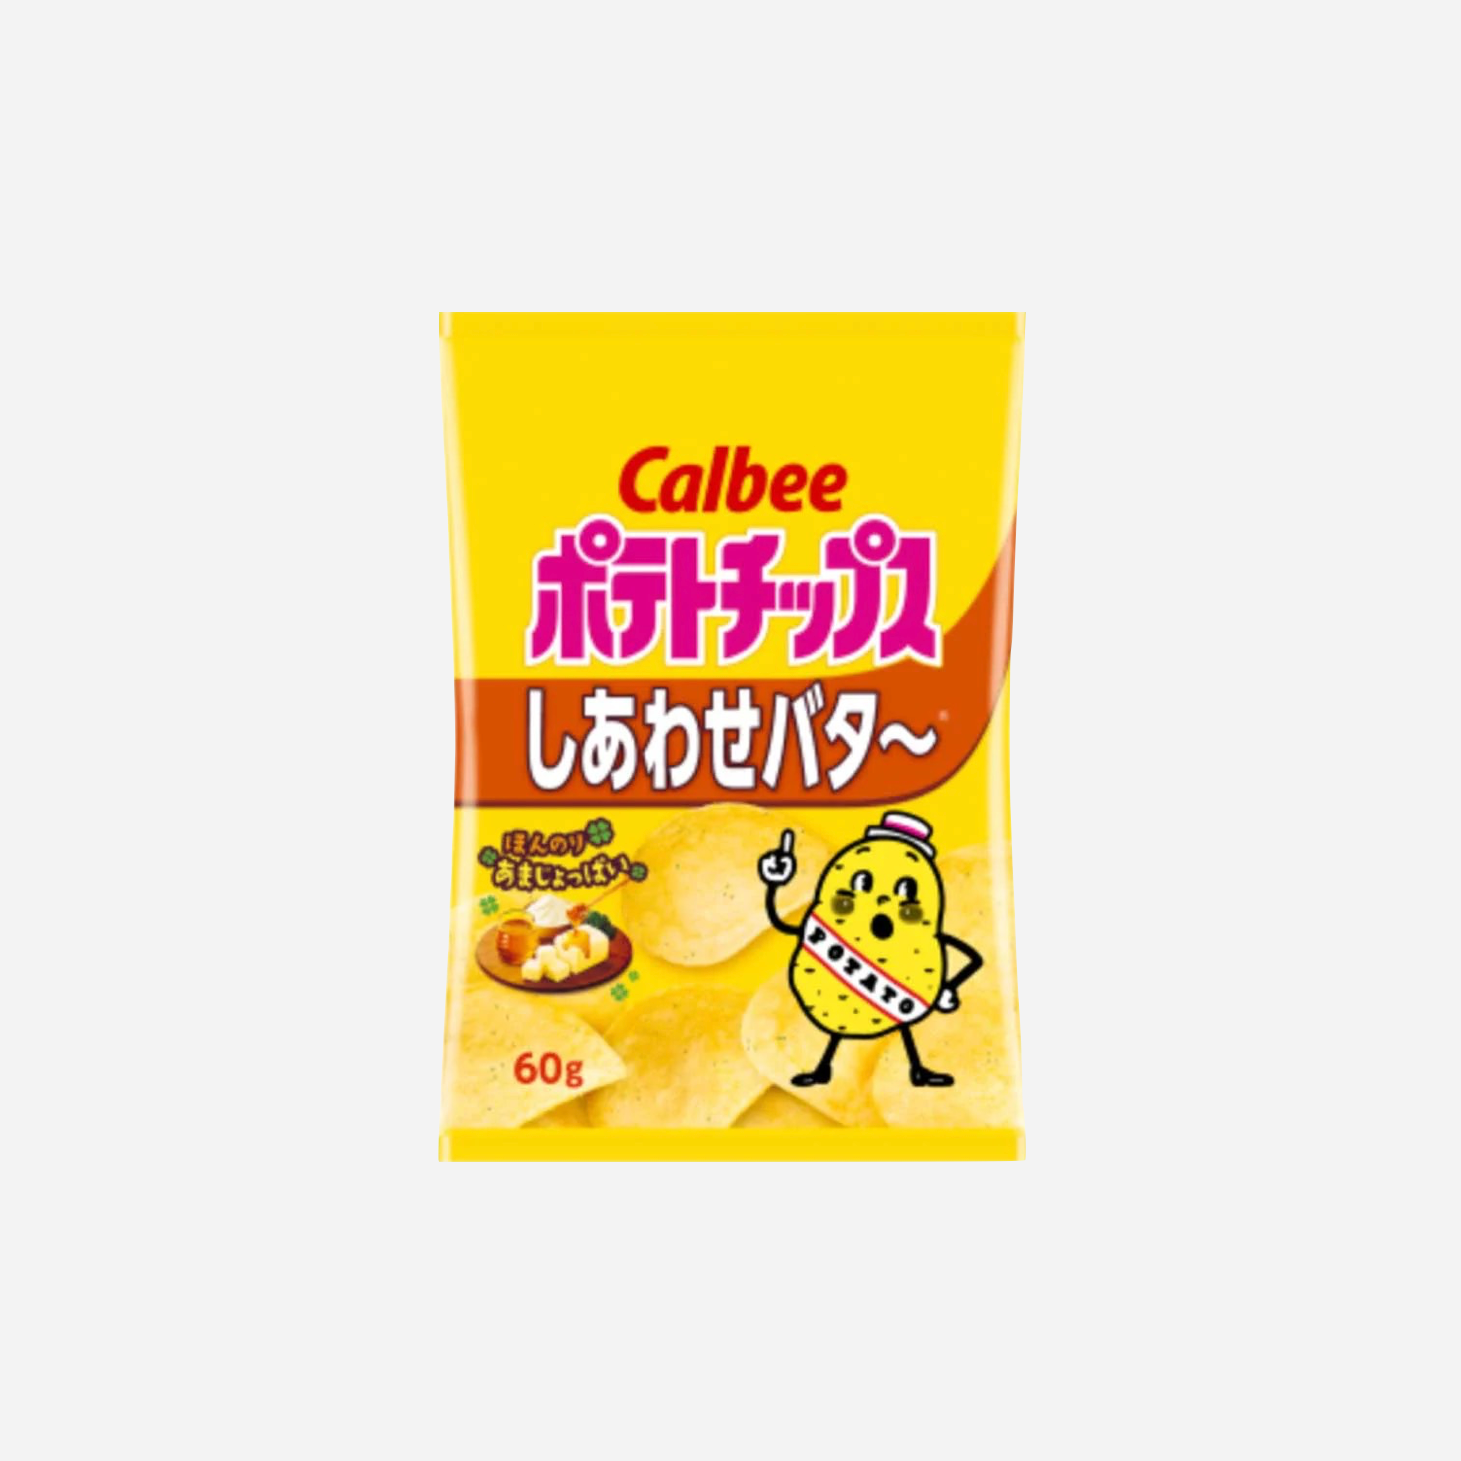 Potato Chips with Butter and Honey Flavor